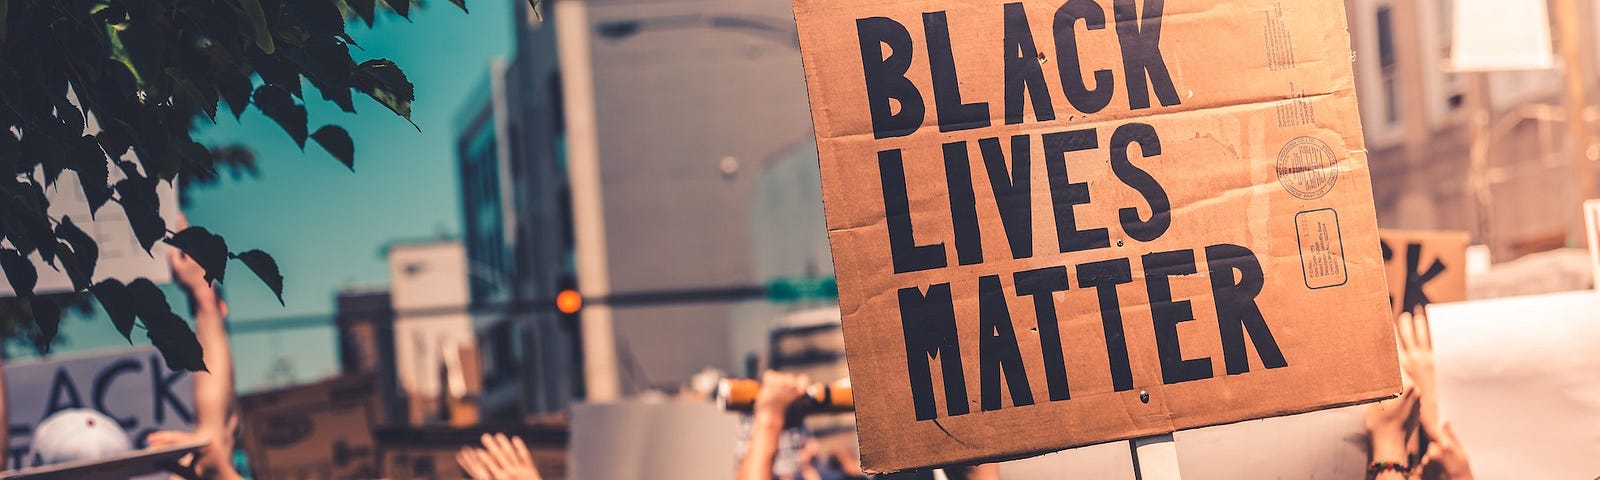 Protestors crowd a street, facing away from the camera. Facing the camera is a cardboard sign saying Black Lives Matter.